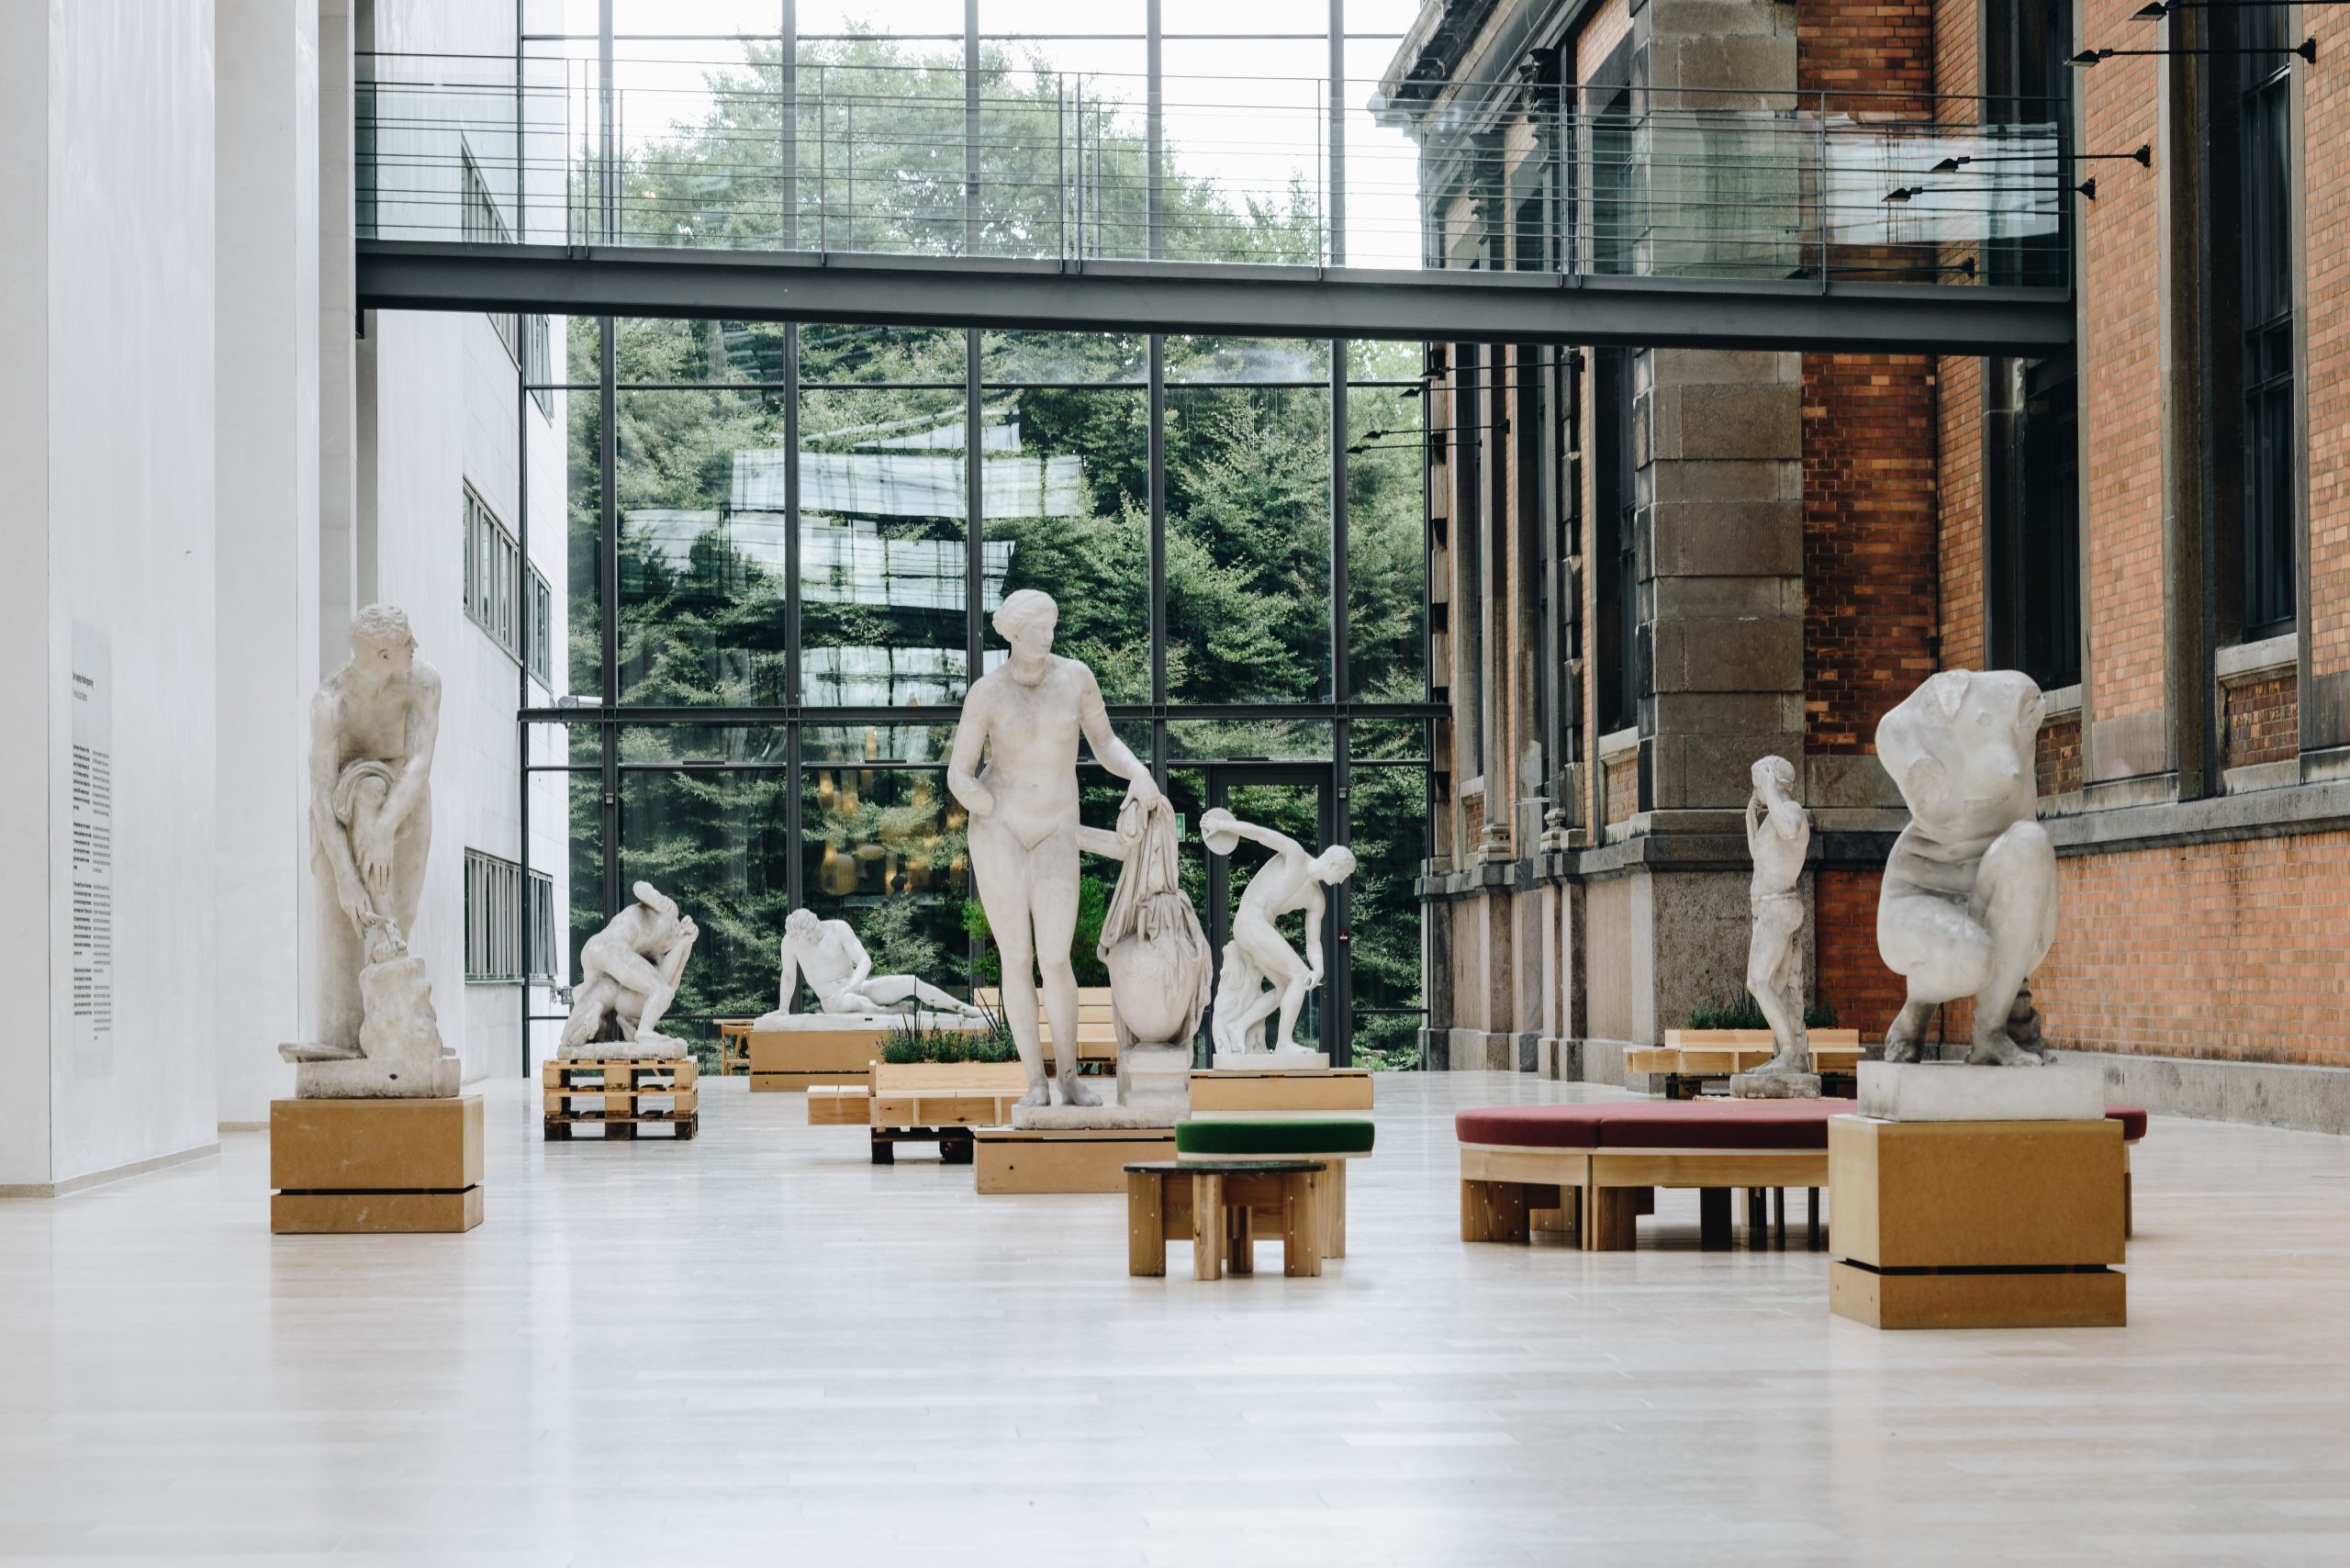 Sculptures in a wide open space in a museum.